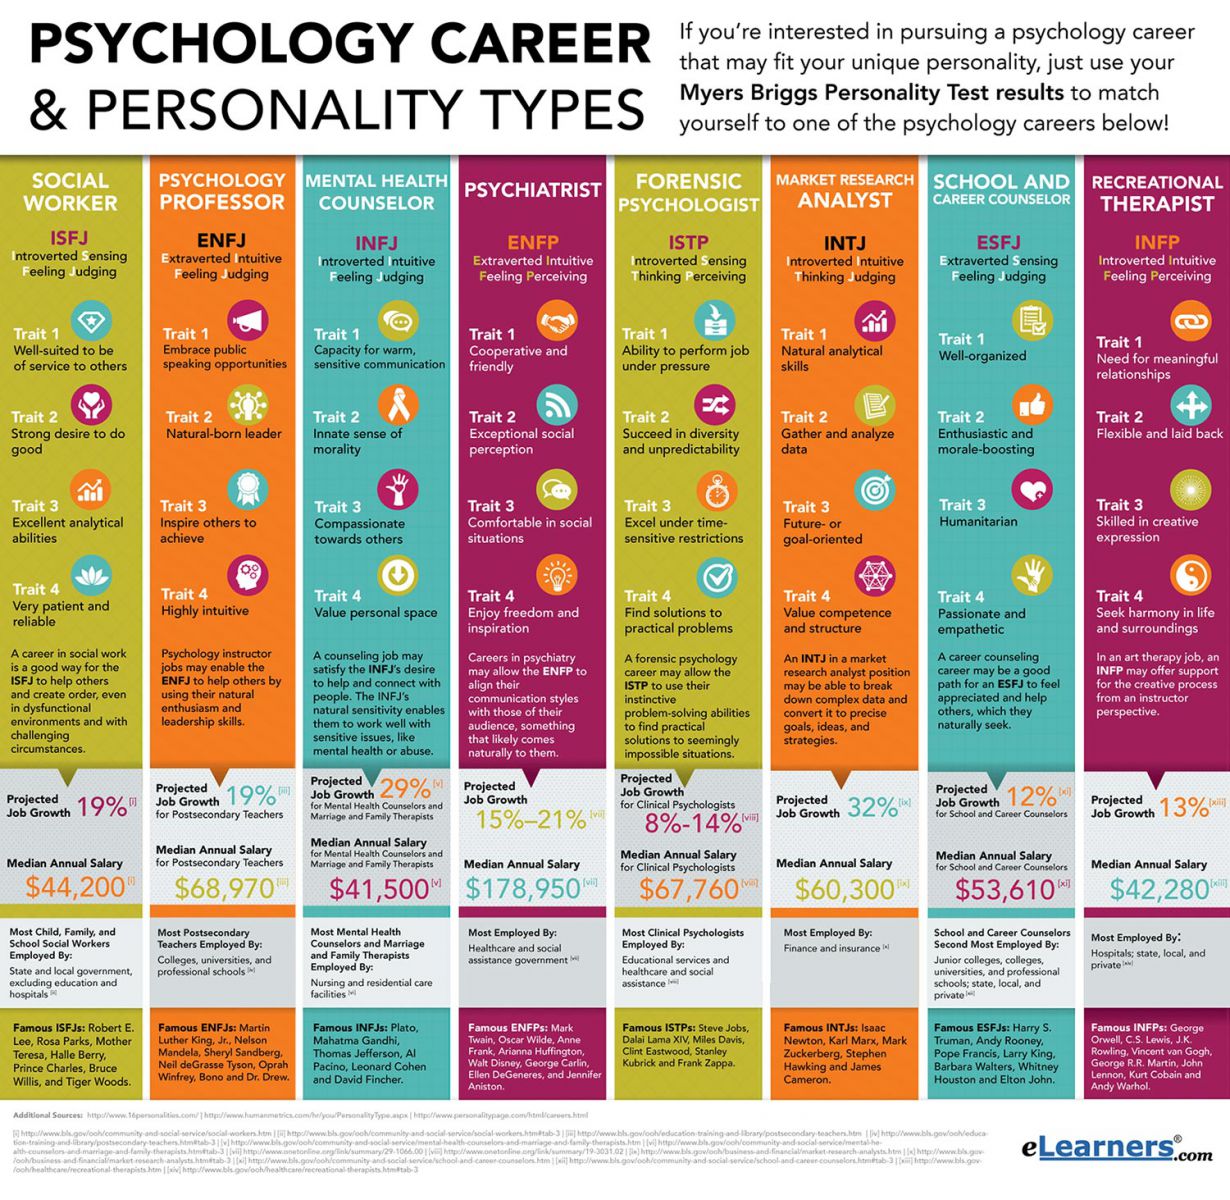 different types of psychology degrees